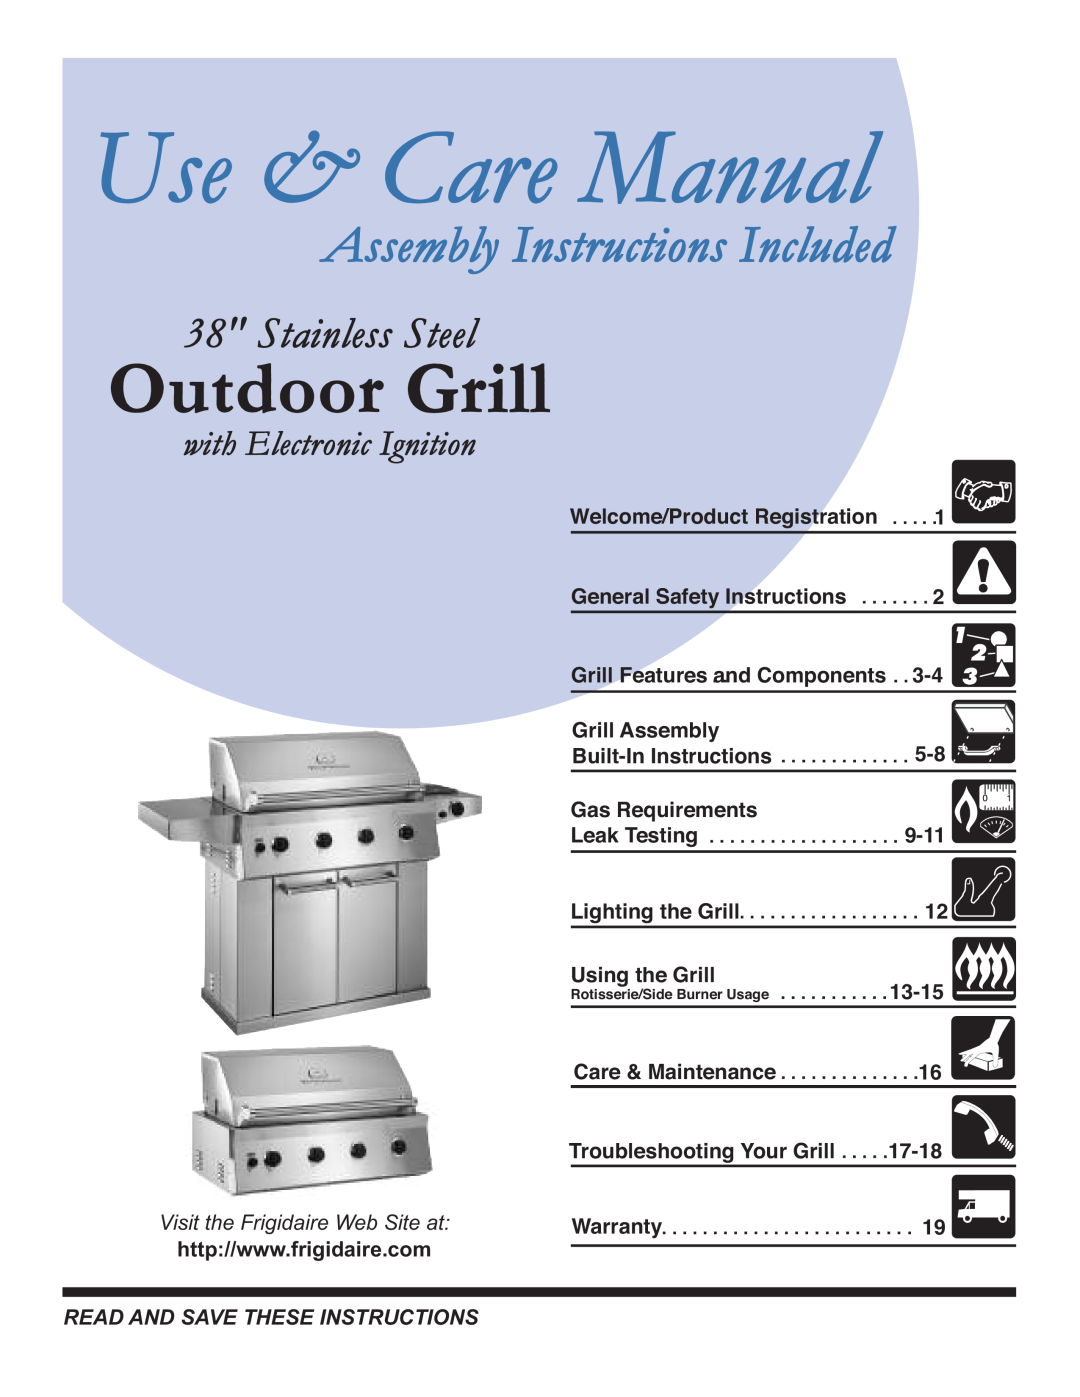 Frigidaire Outdoor Grill with Electronic Ignition warranty Use & Care Manual, Assembly Instructions Included 